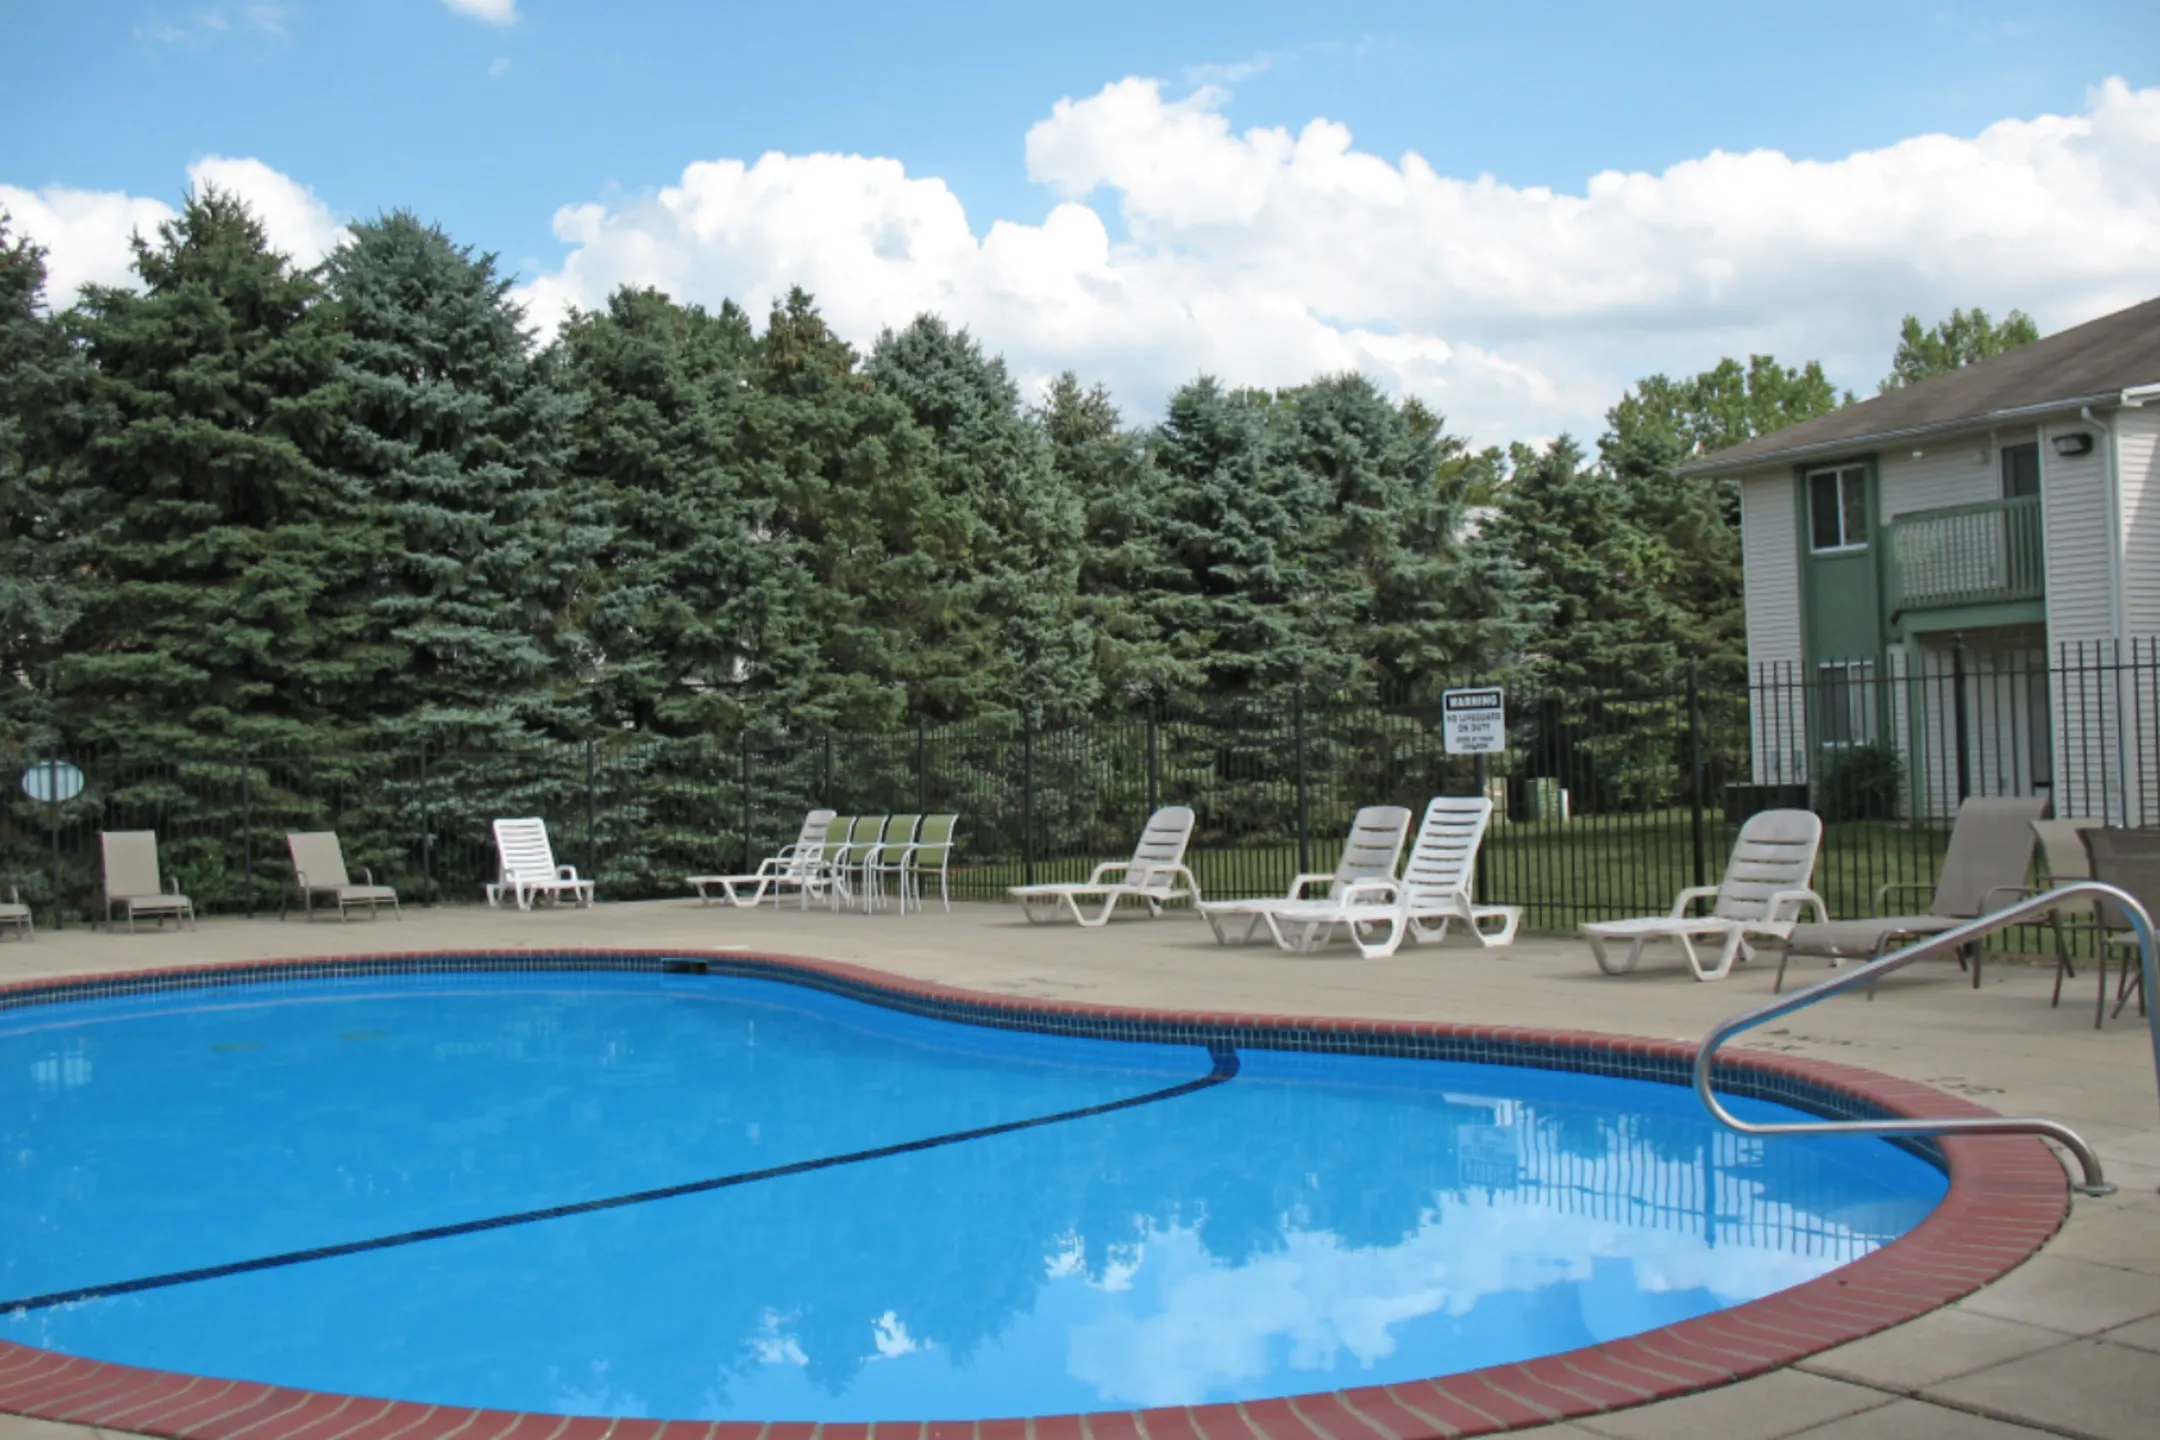 Pool - Country View Apartments - Toledo, OH